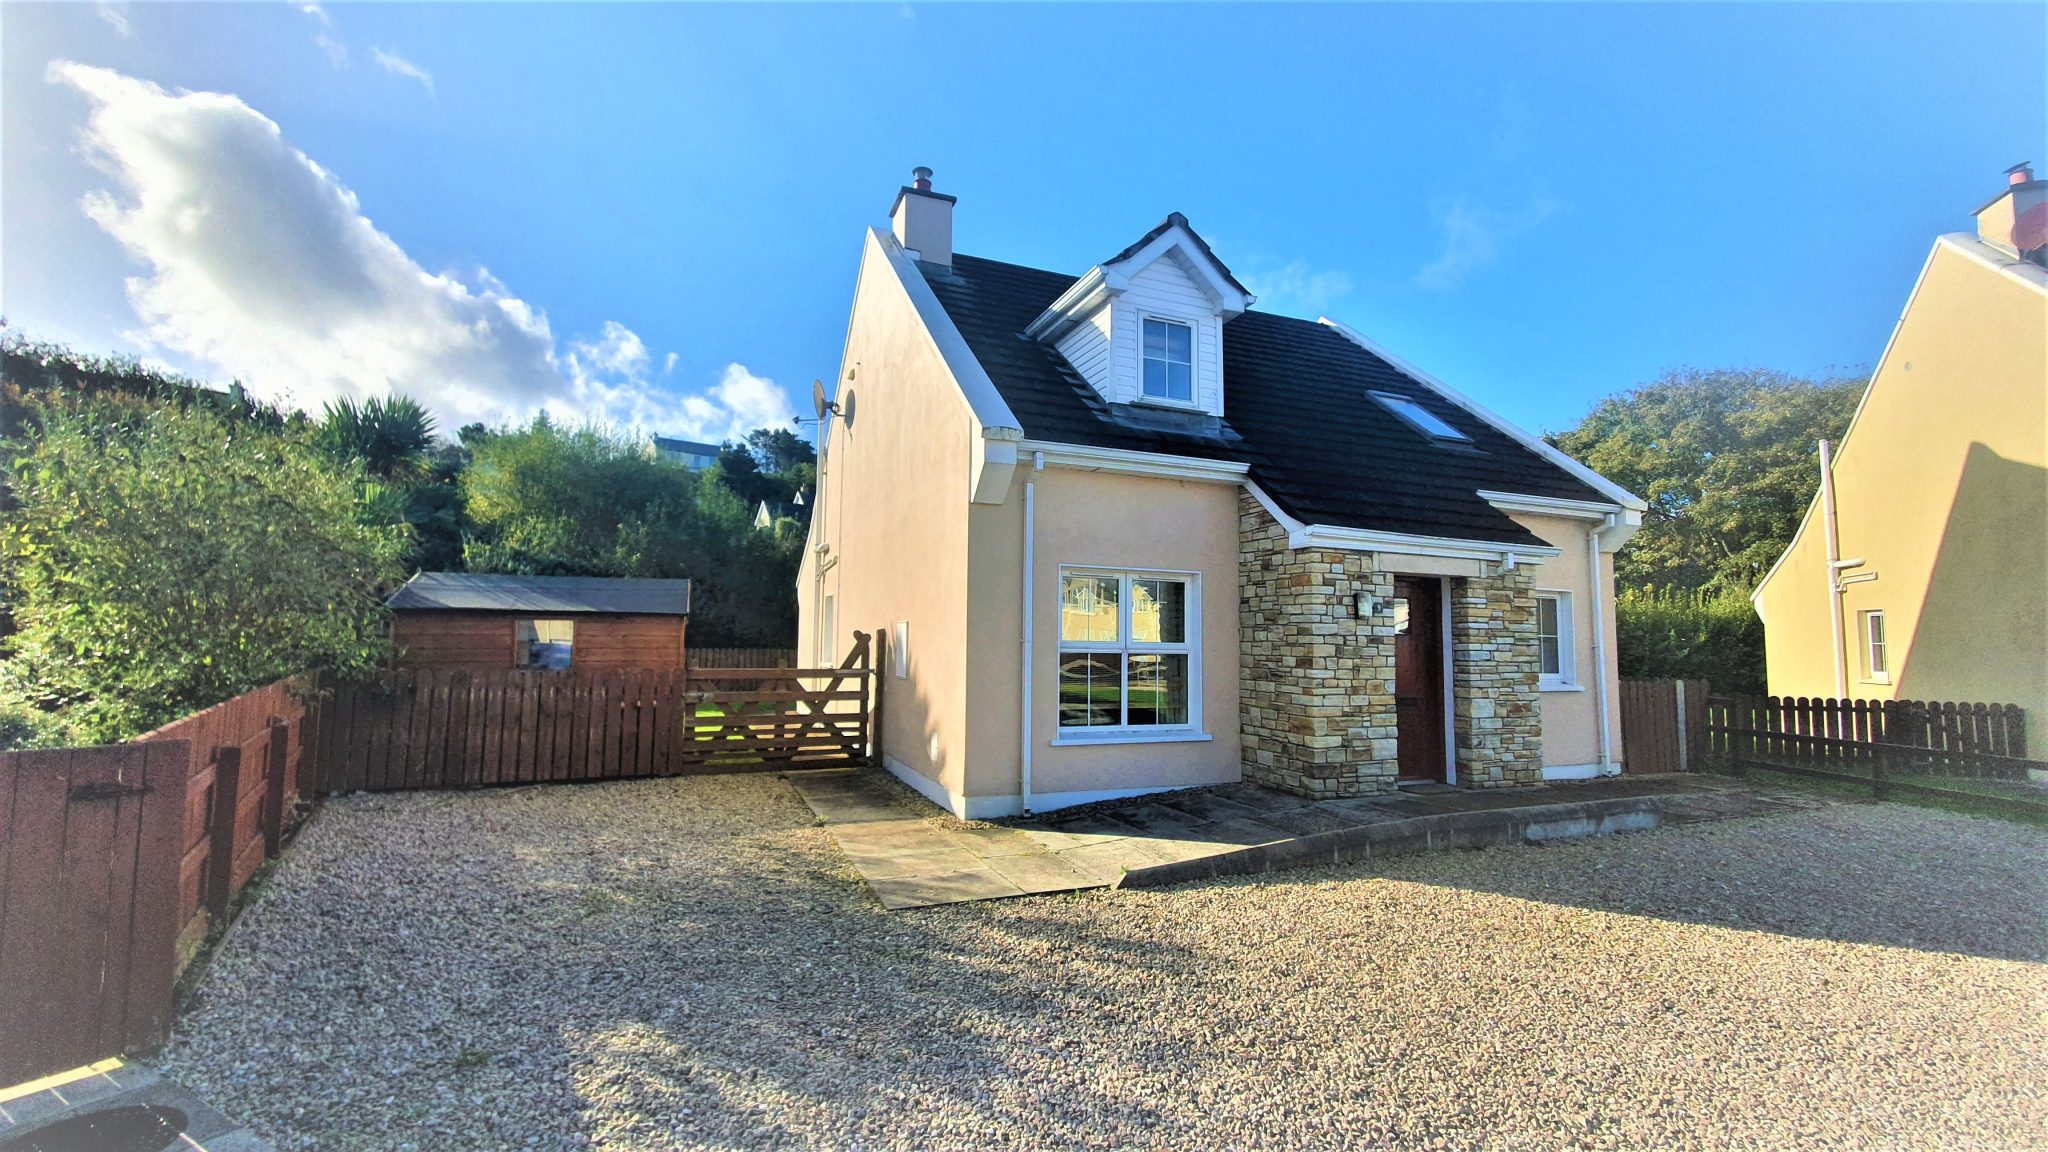 No. 9 The Links, Portnablagh, Dunfanaghy. – Two Storey 3 Bedroom Detached House.